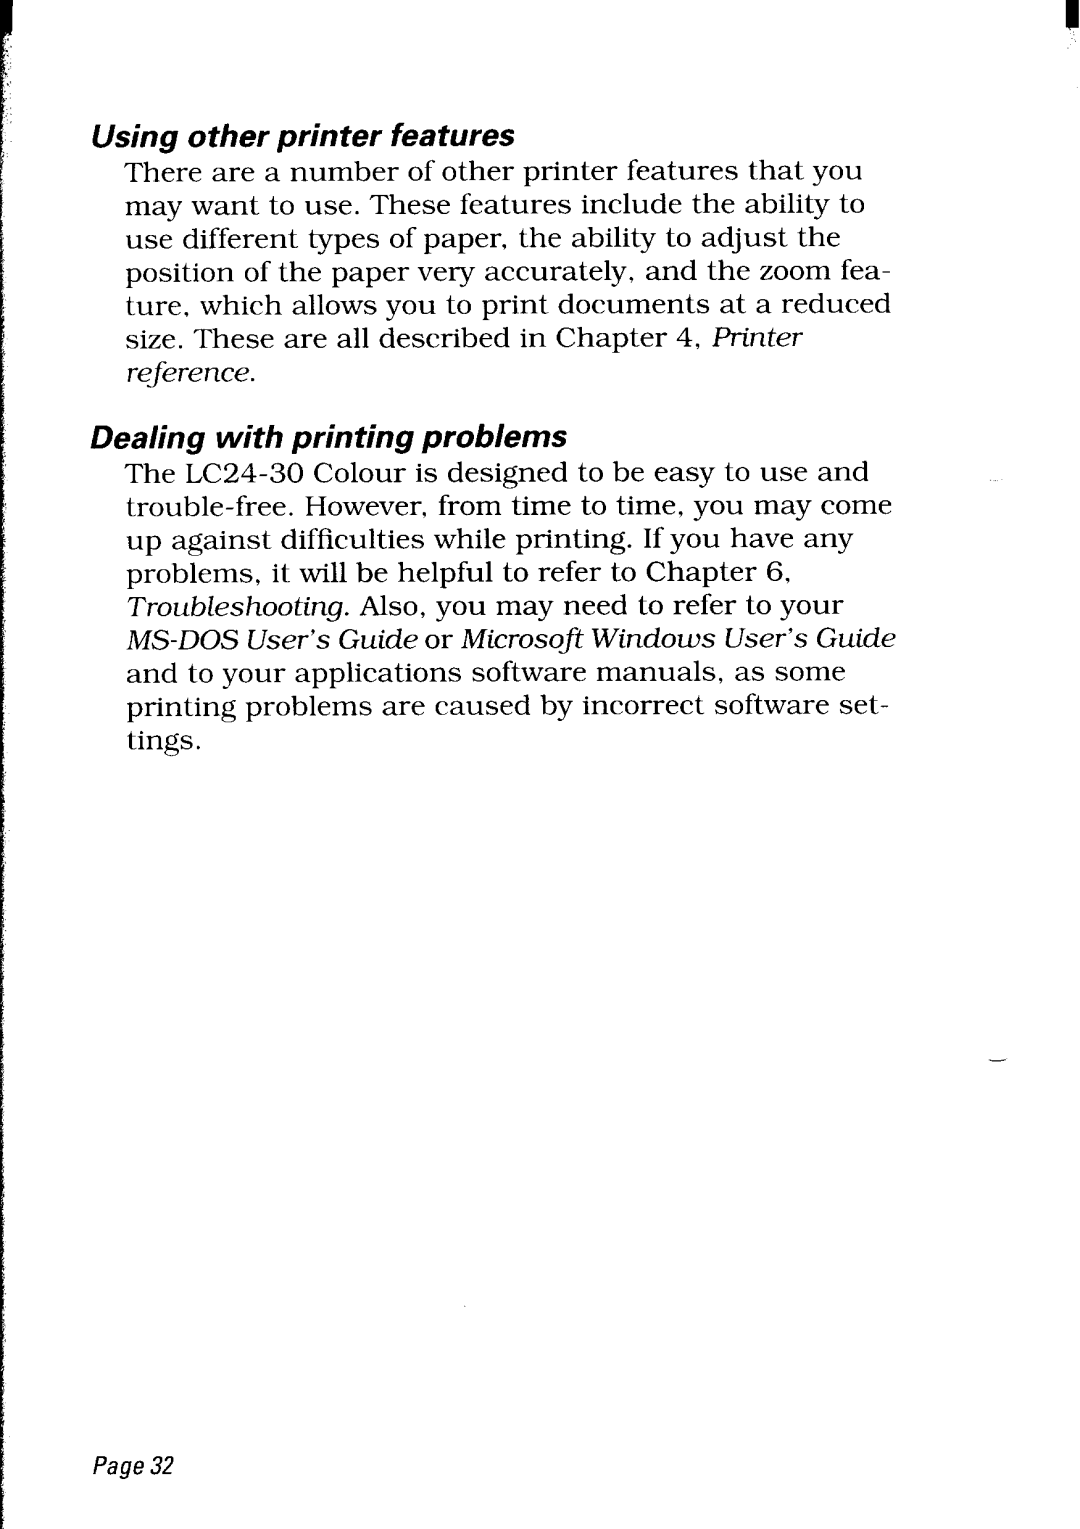 Star Micronics LC24-30 user manual Using other printer features, Dealing with printing problems 